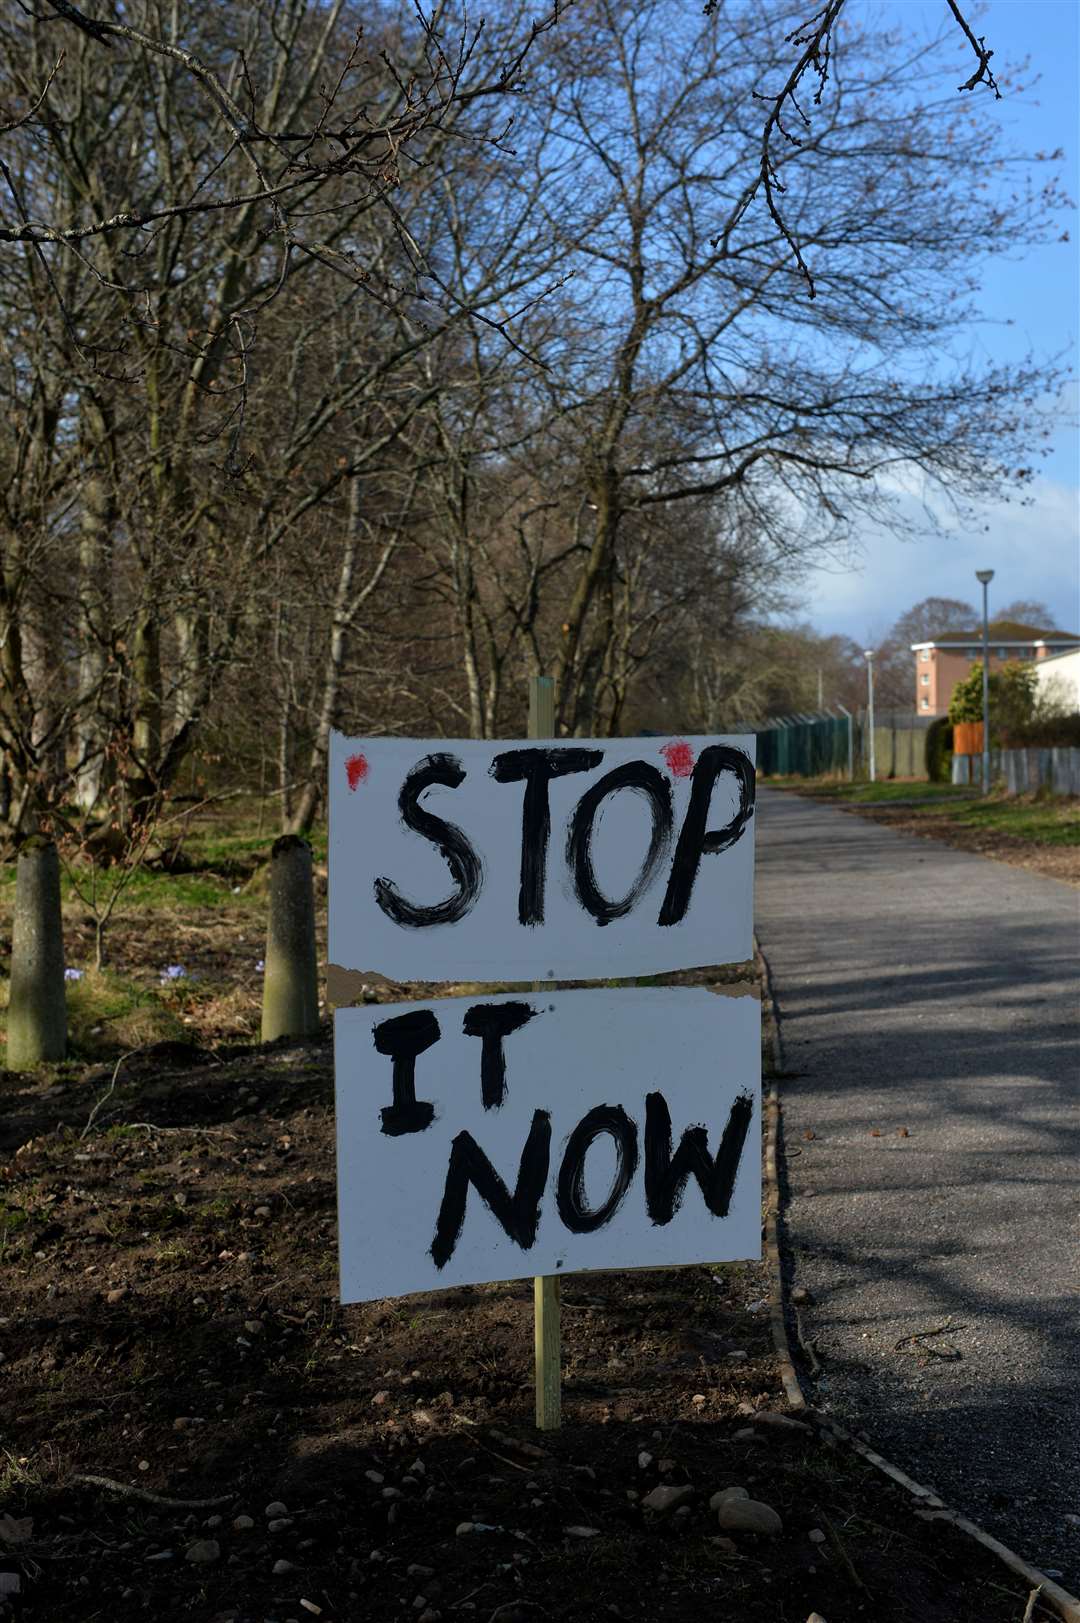 Proposals for a busgate at Raigmore Hospital have run into opposition from nearby residents.